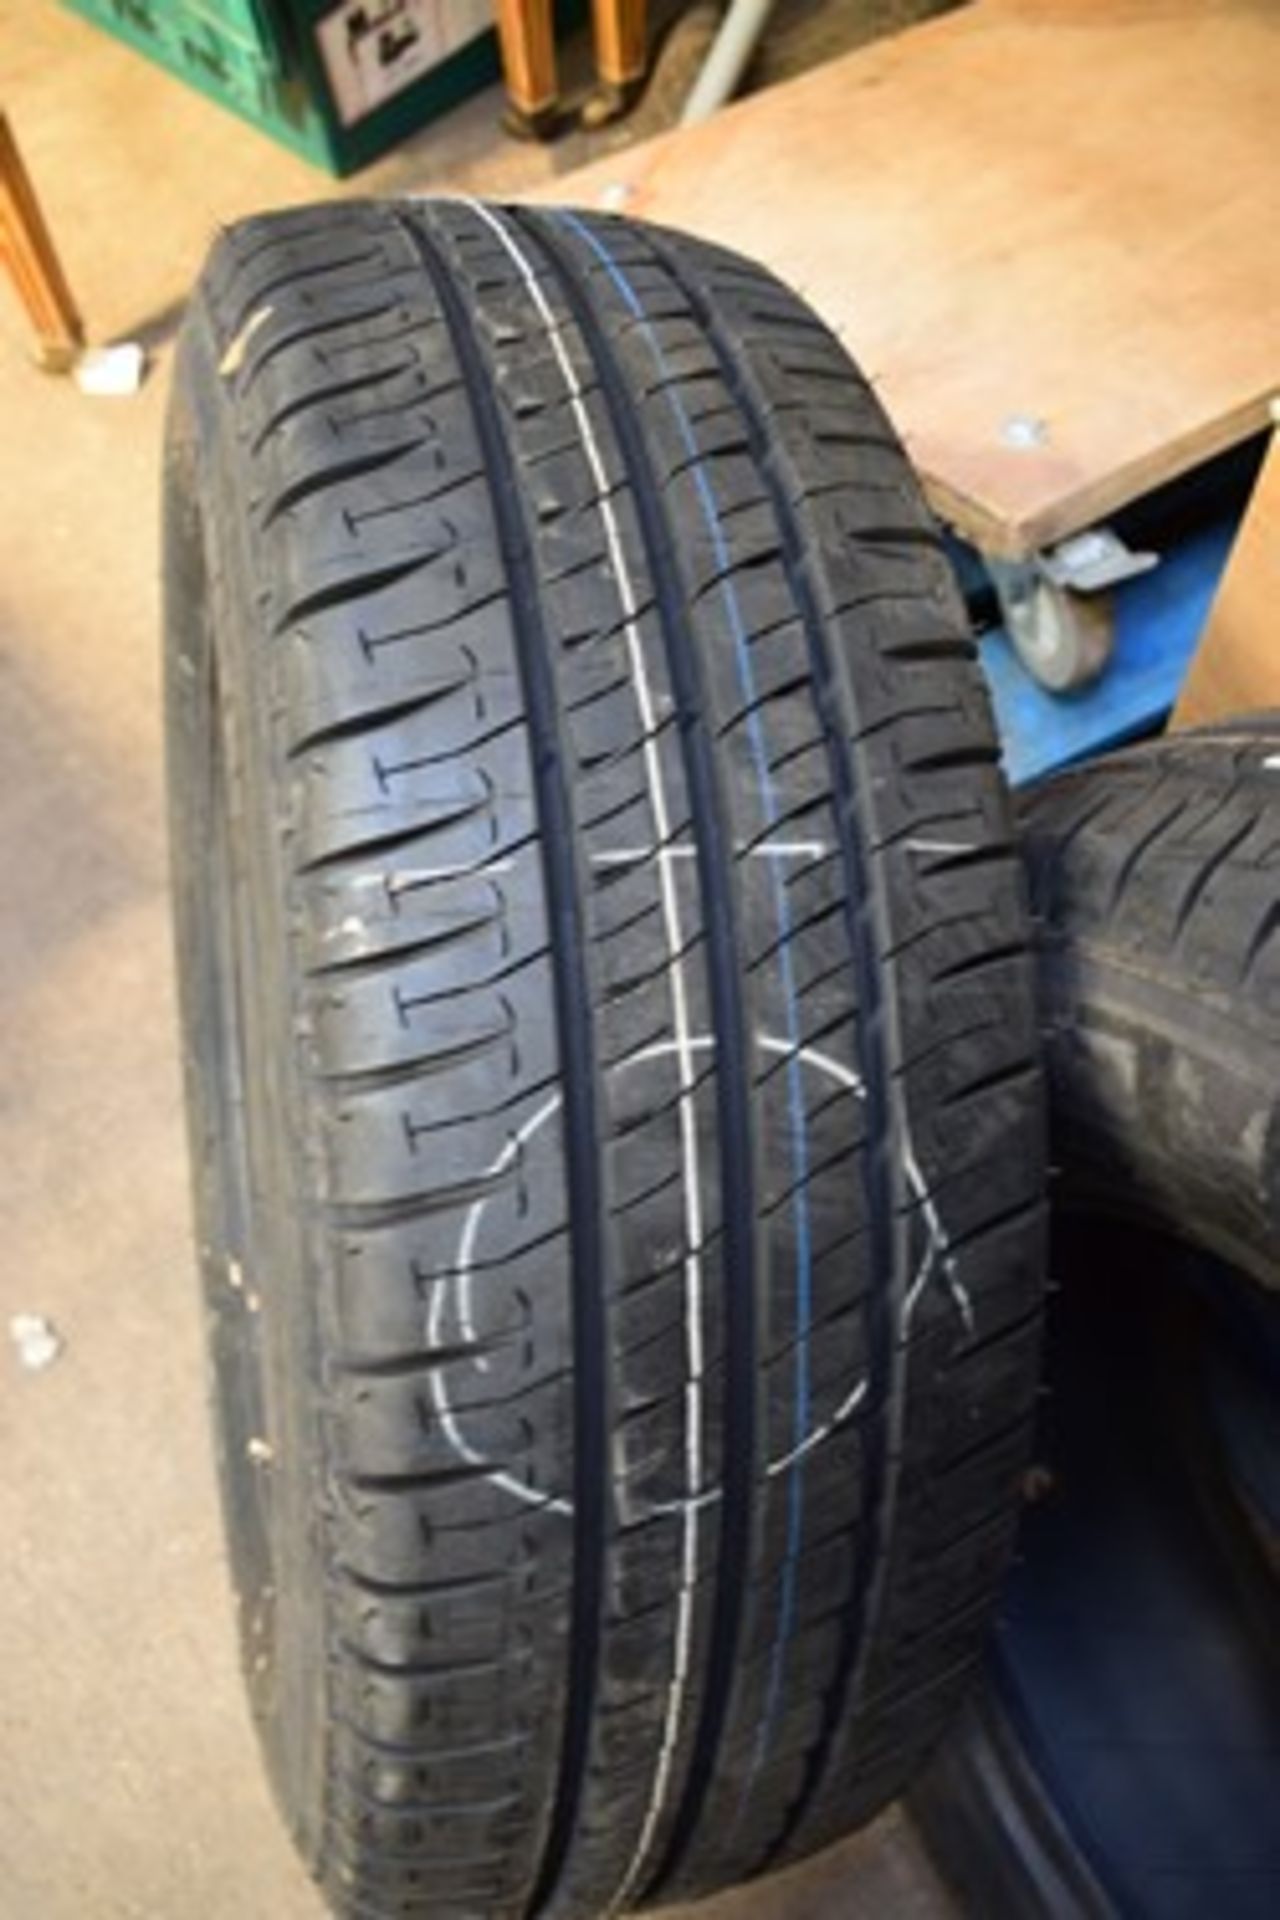 1 x pair of Michelin Agilis + tyres, size 225/65R16C 112/110R TL - circle mark to one tyre - New - Image 2 of 2